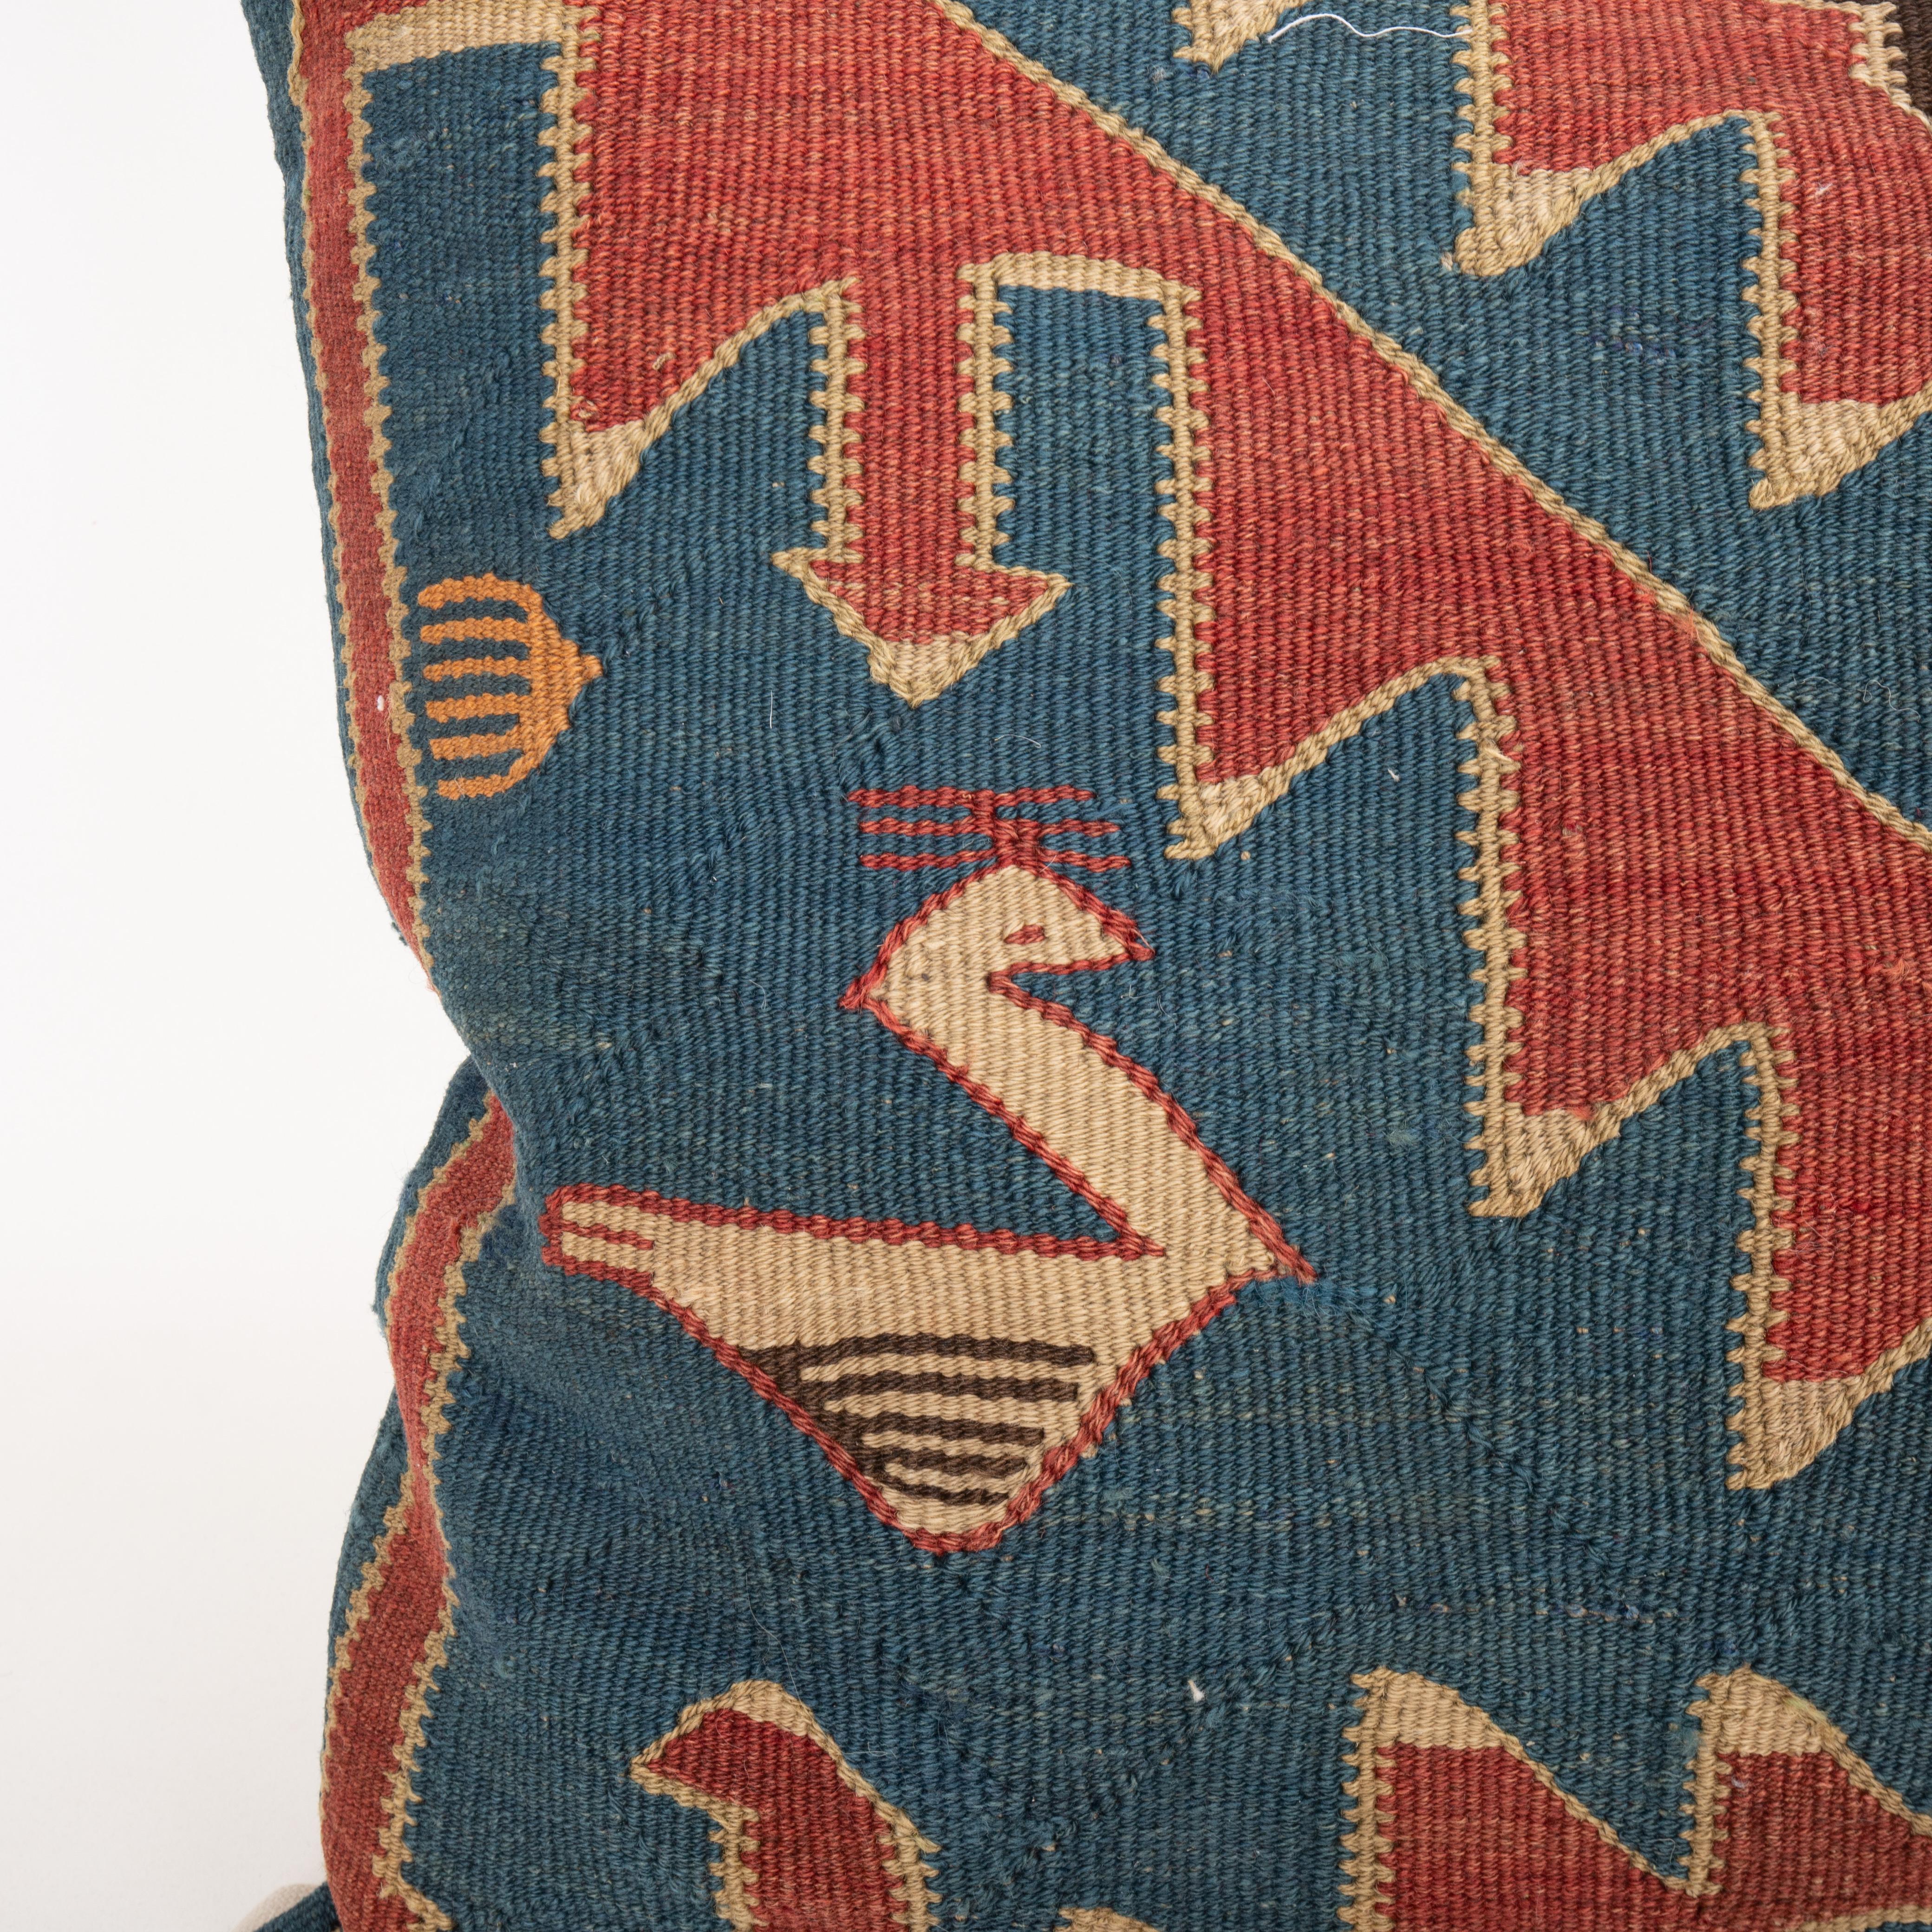 Hand-Woven  Floor Cushion Made from an Antique Avar Kilim from Dagestan , Early 20th C. For Sale